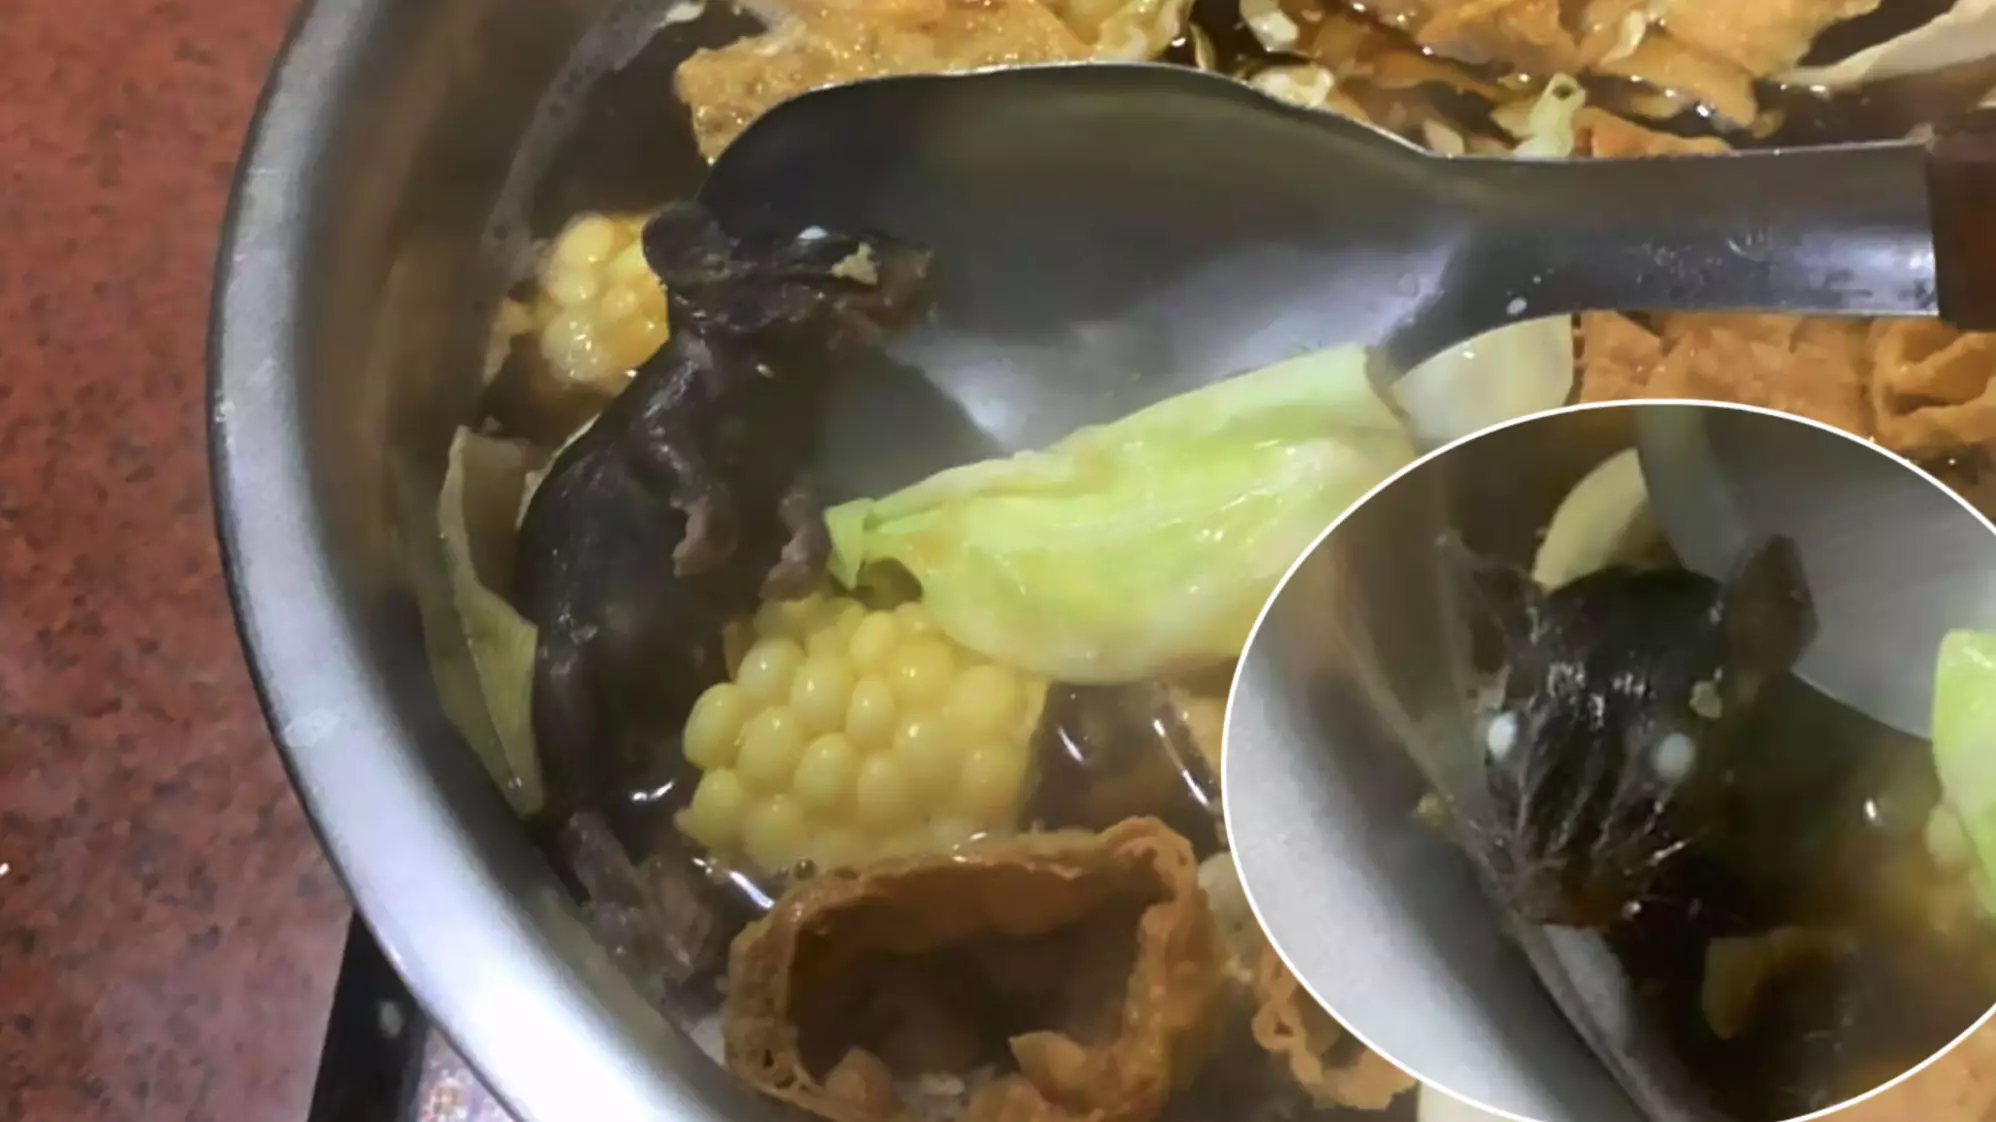 Man Shocked To Find Dead Rodent Floating In His Stew